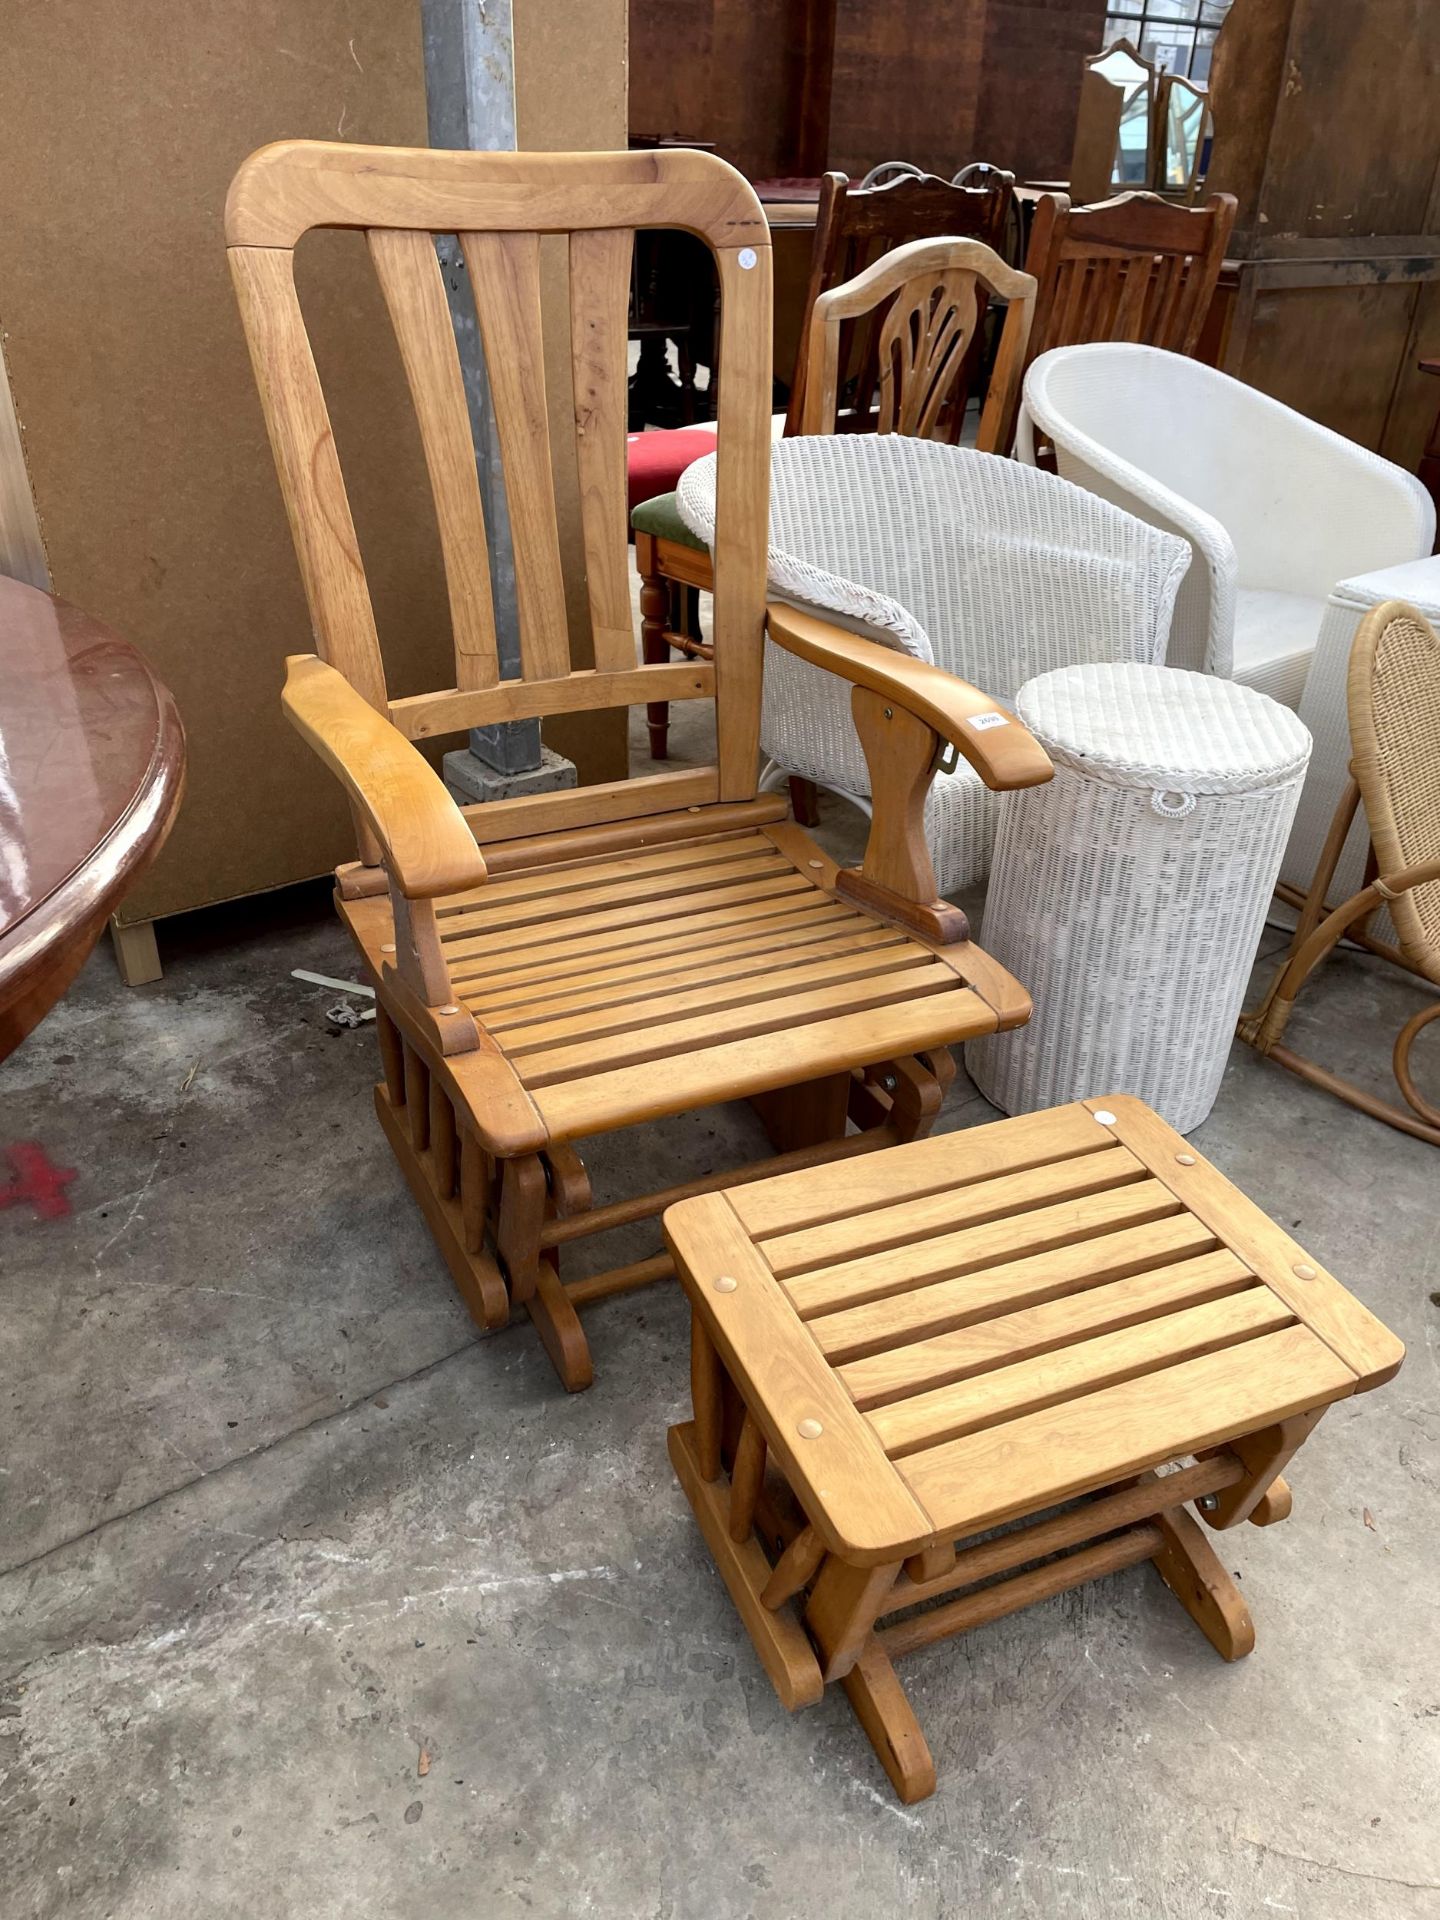 A MODERN FORWARD SLIDE SLATTED ROCKING CHAIR AND MATCHING STOOL